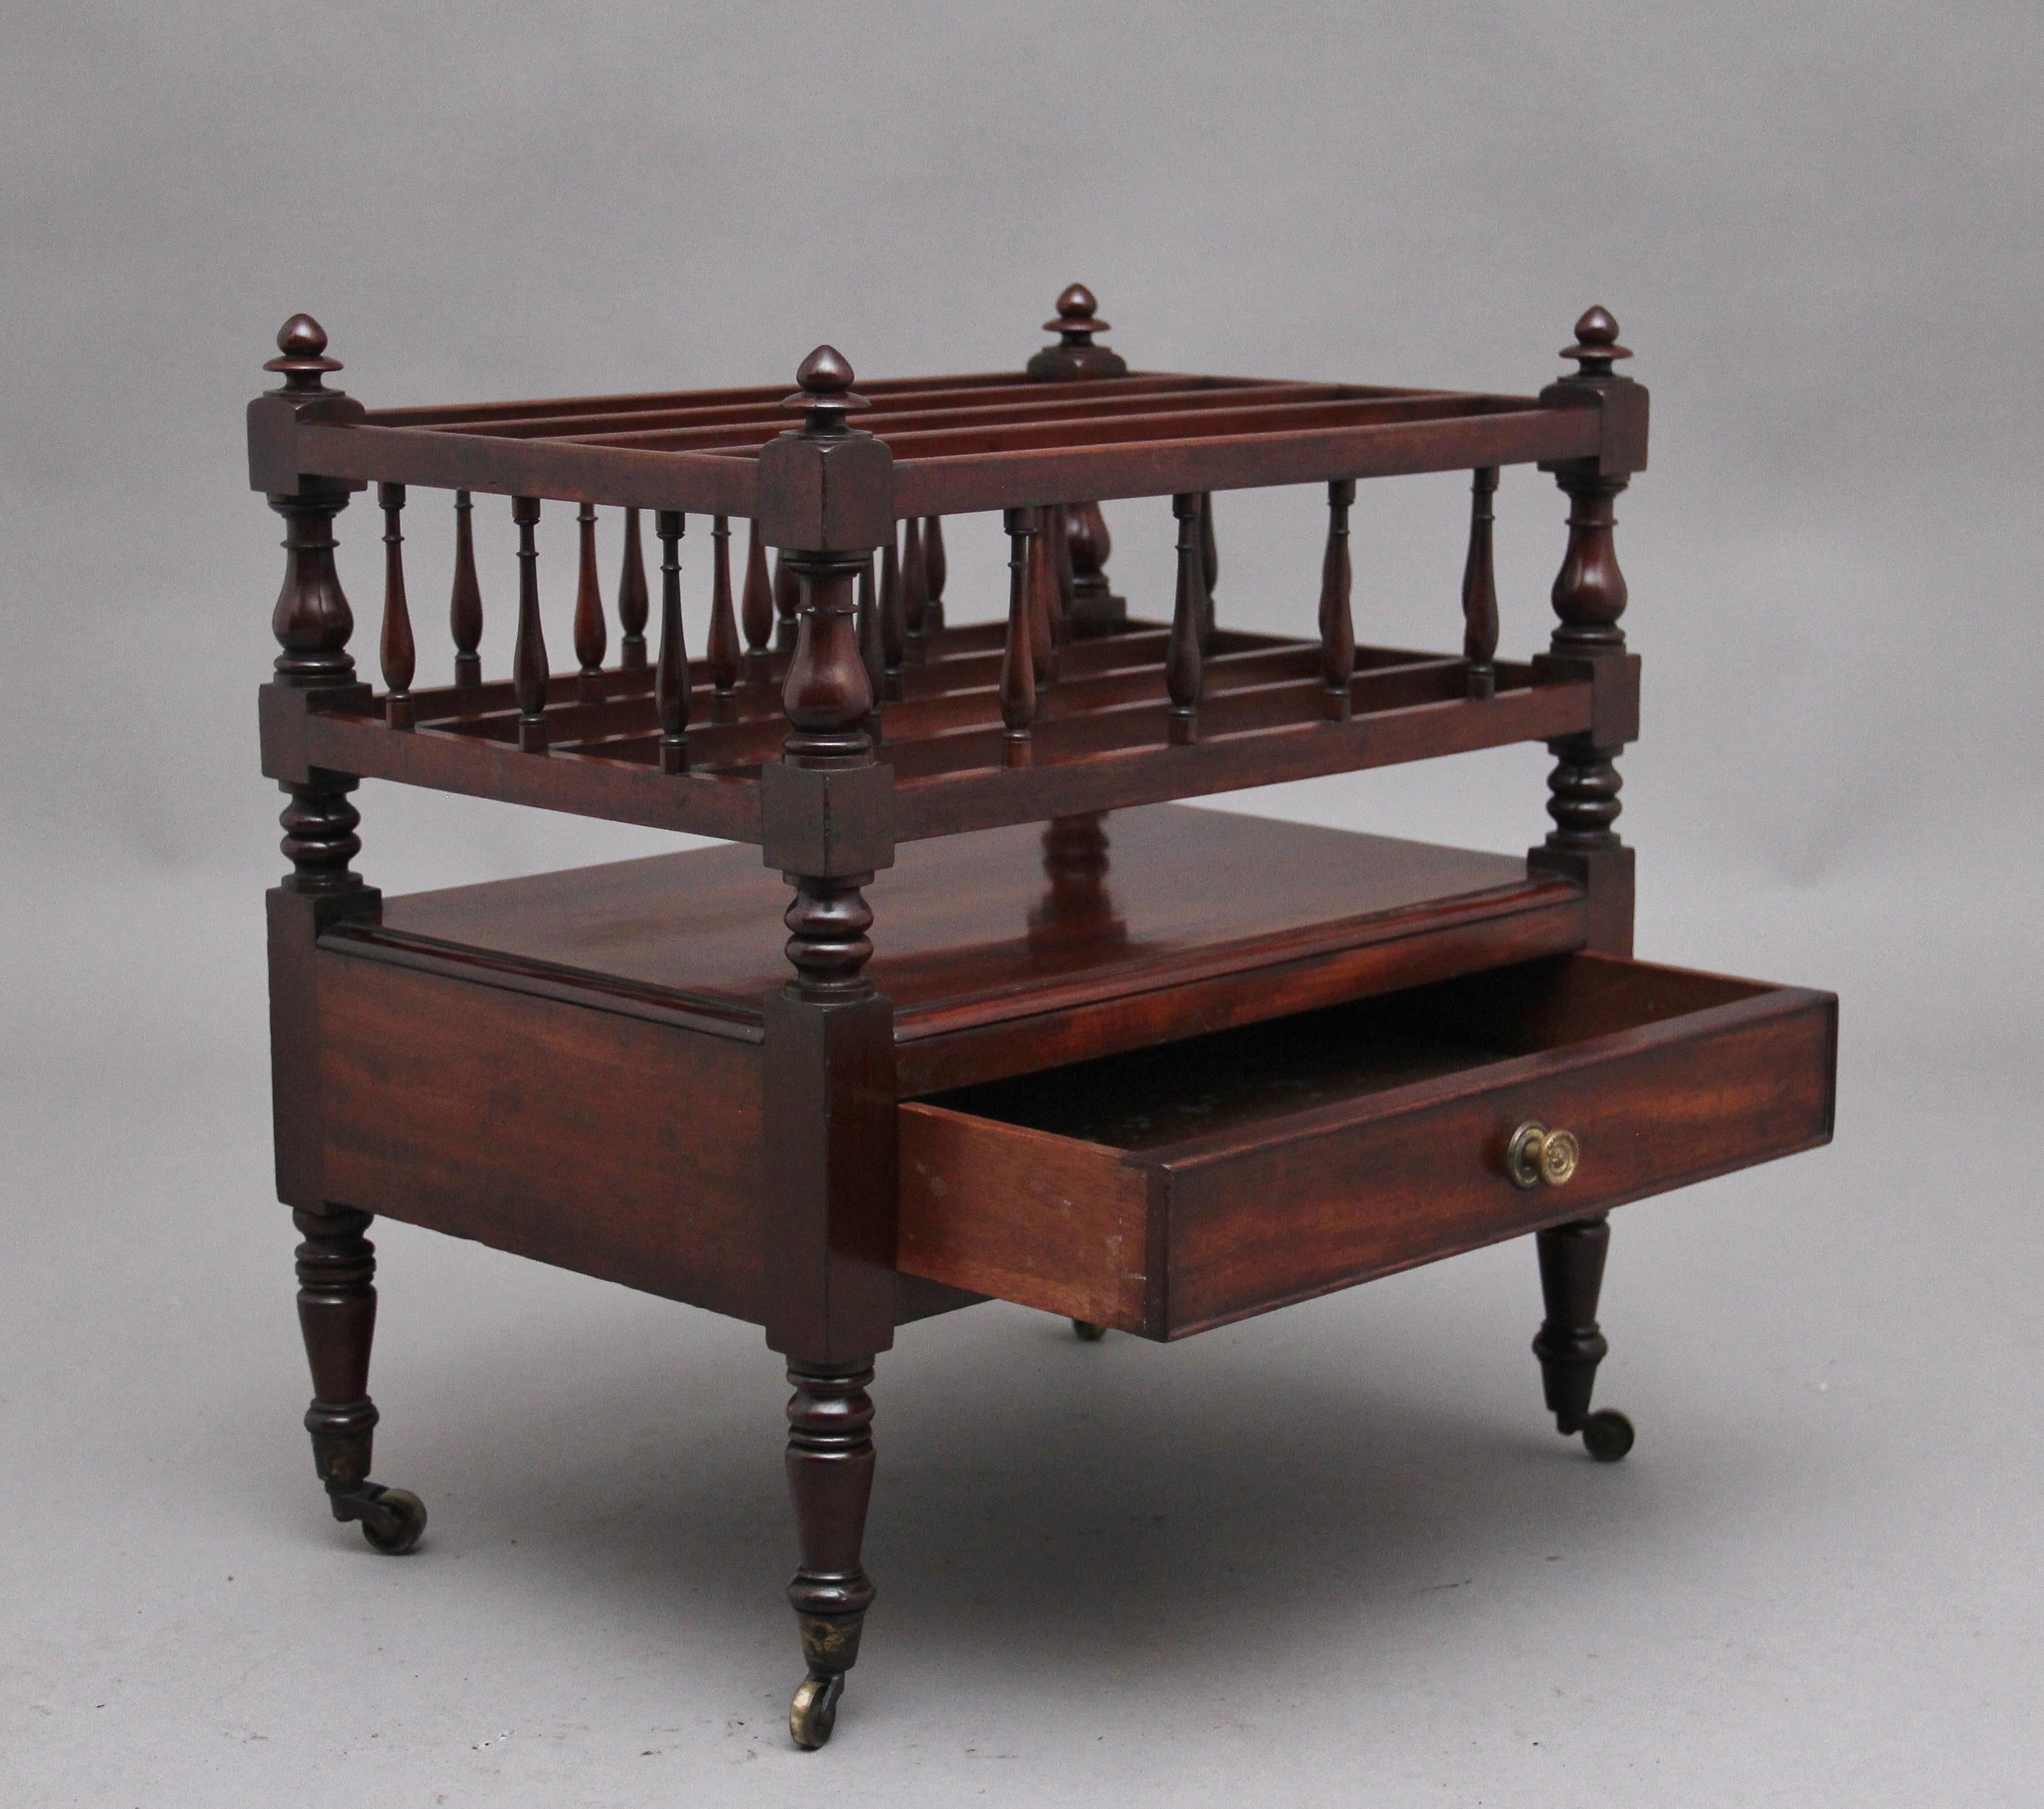 Early 19th Century mahogany Canterbury, the top section having turned columns in each corner finished with turned finials, inside having four dividers incorporating fine turned columns, having a mahogany lined frieze drawer below with original brass